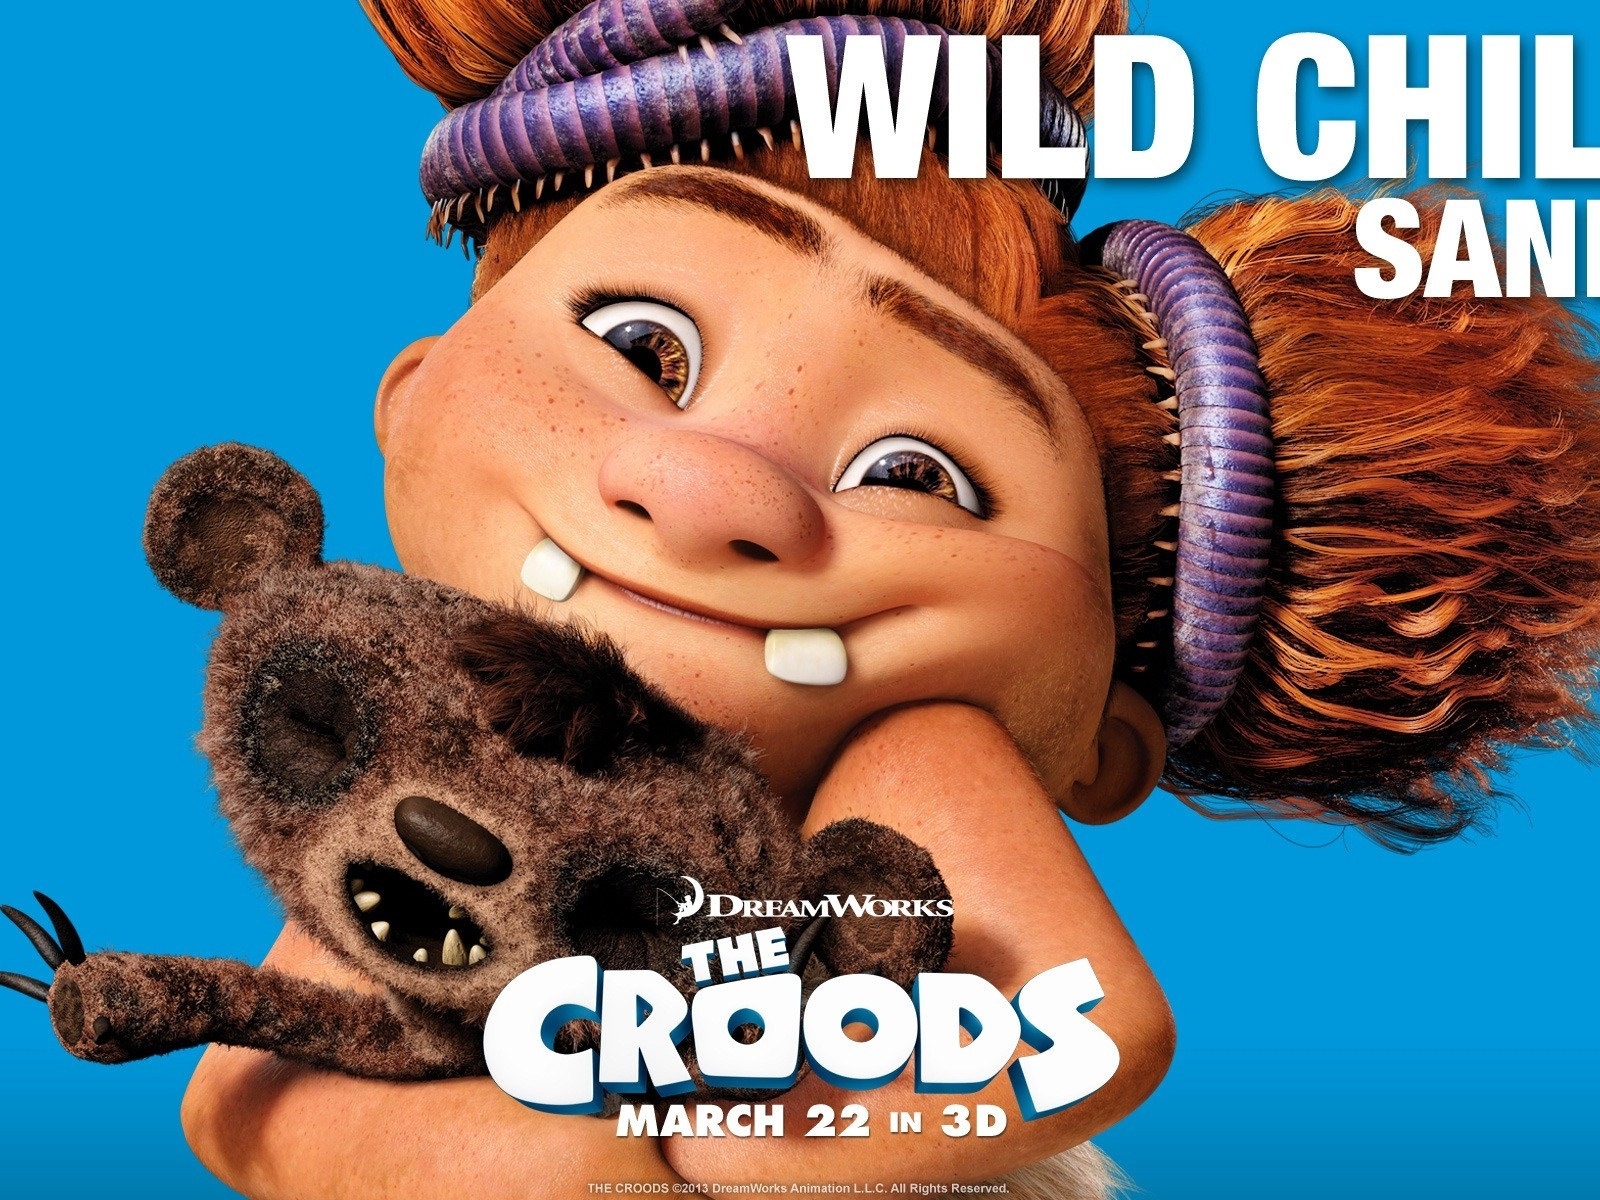 V Croods HD Movie Wallpapers #9 - 1600x1200